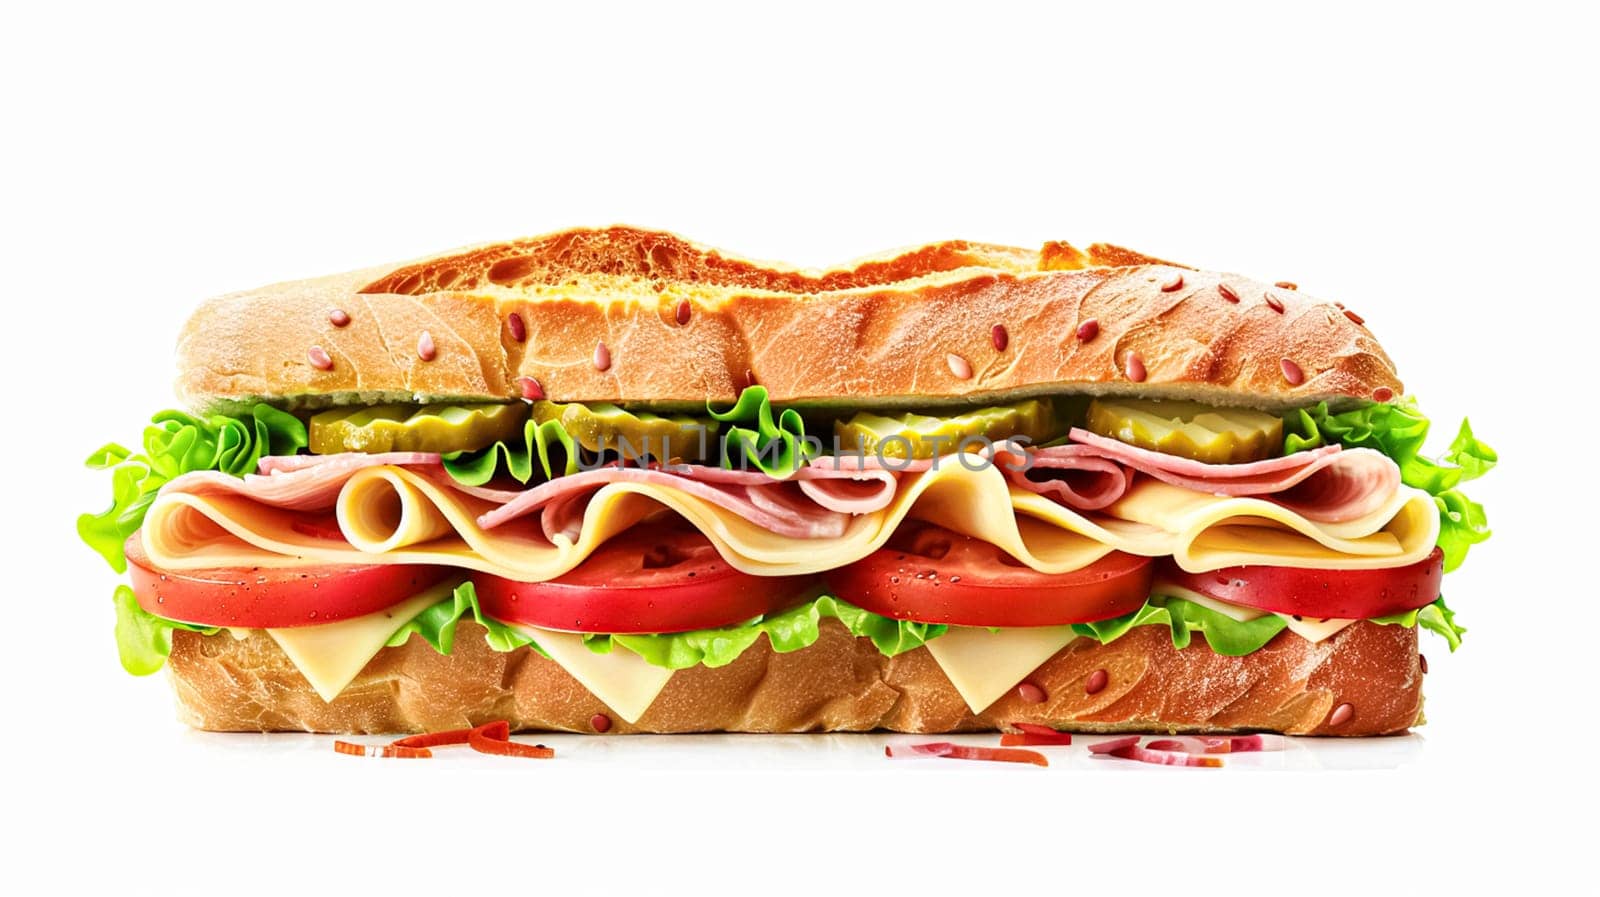 Perfect baguette sandwich, fast food chain menu commercial by Anneleven